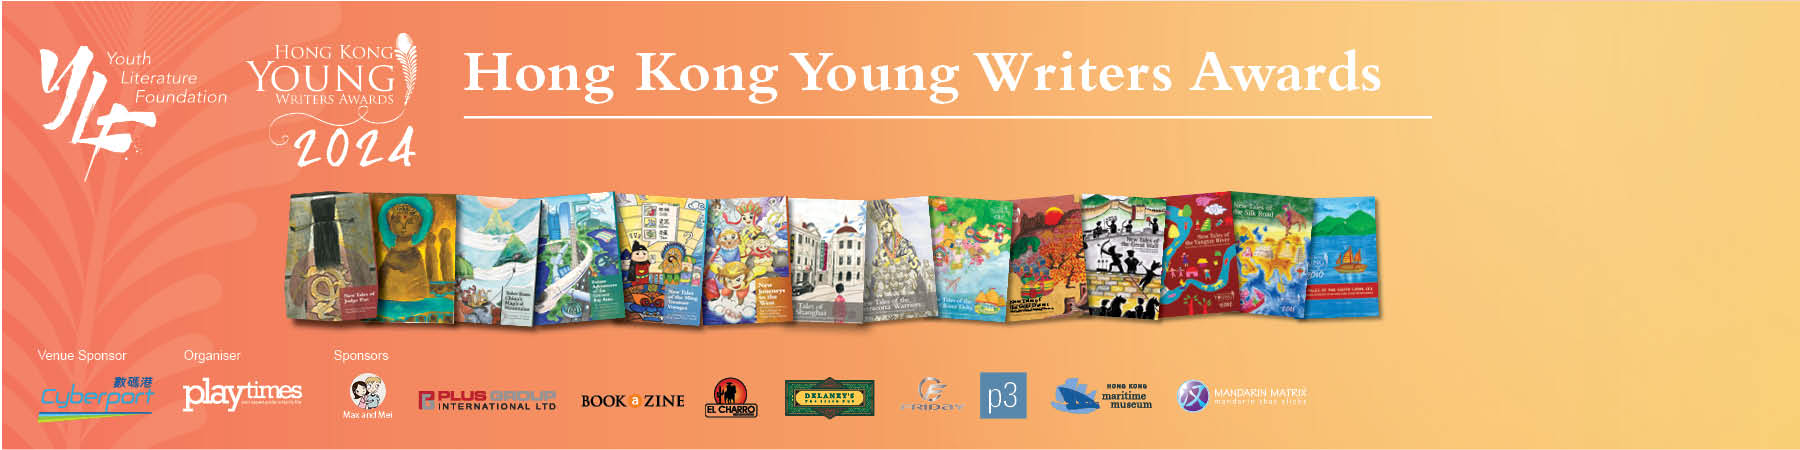 young writers awards essay competition